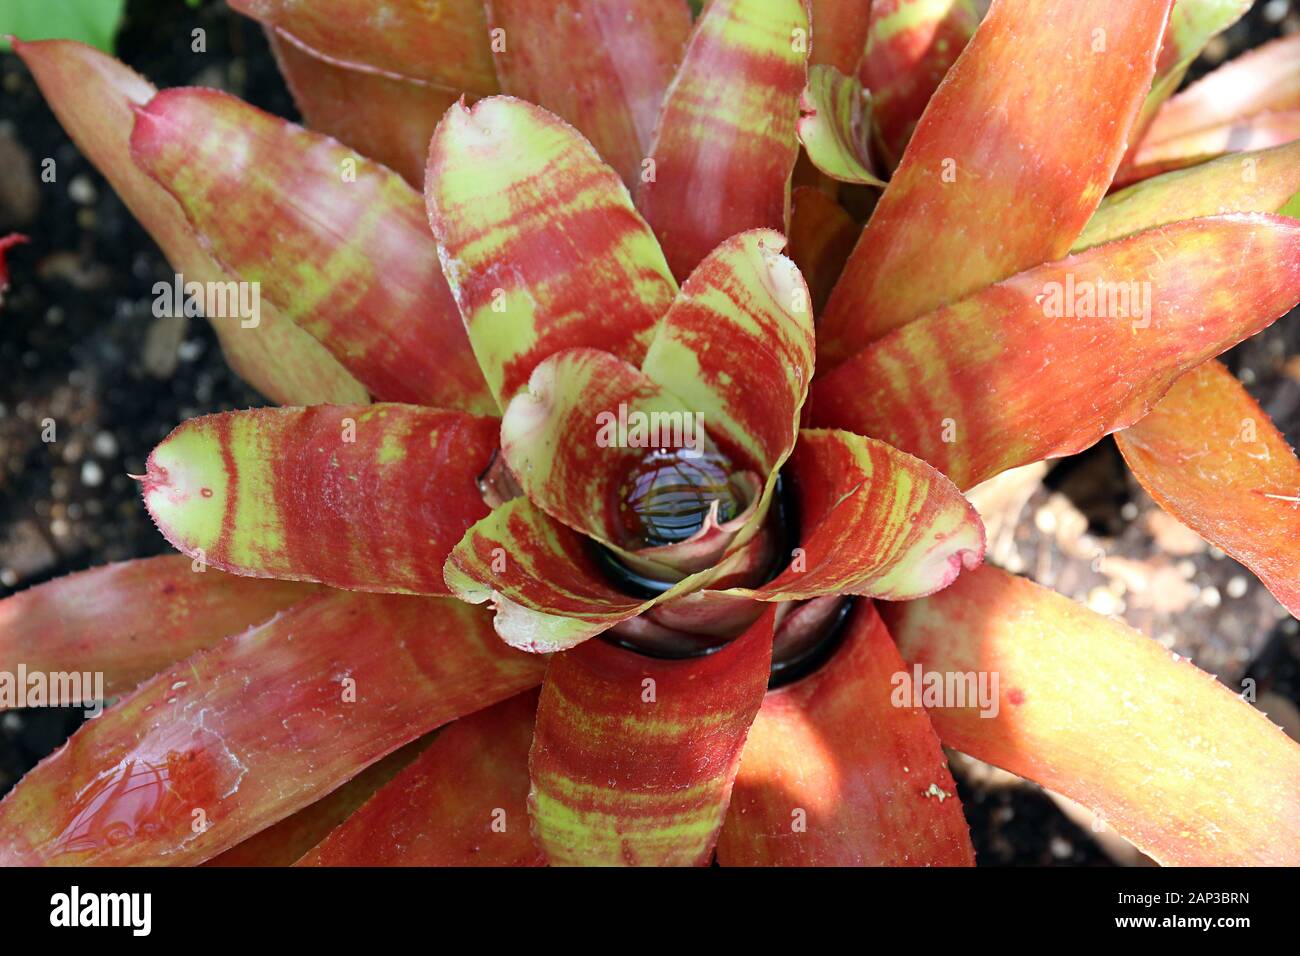 Close up of the center of a Bromeliad plant filled with water with red and green striped leaves Stock Photo